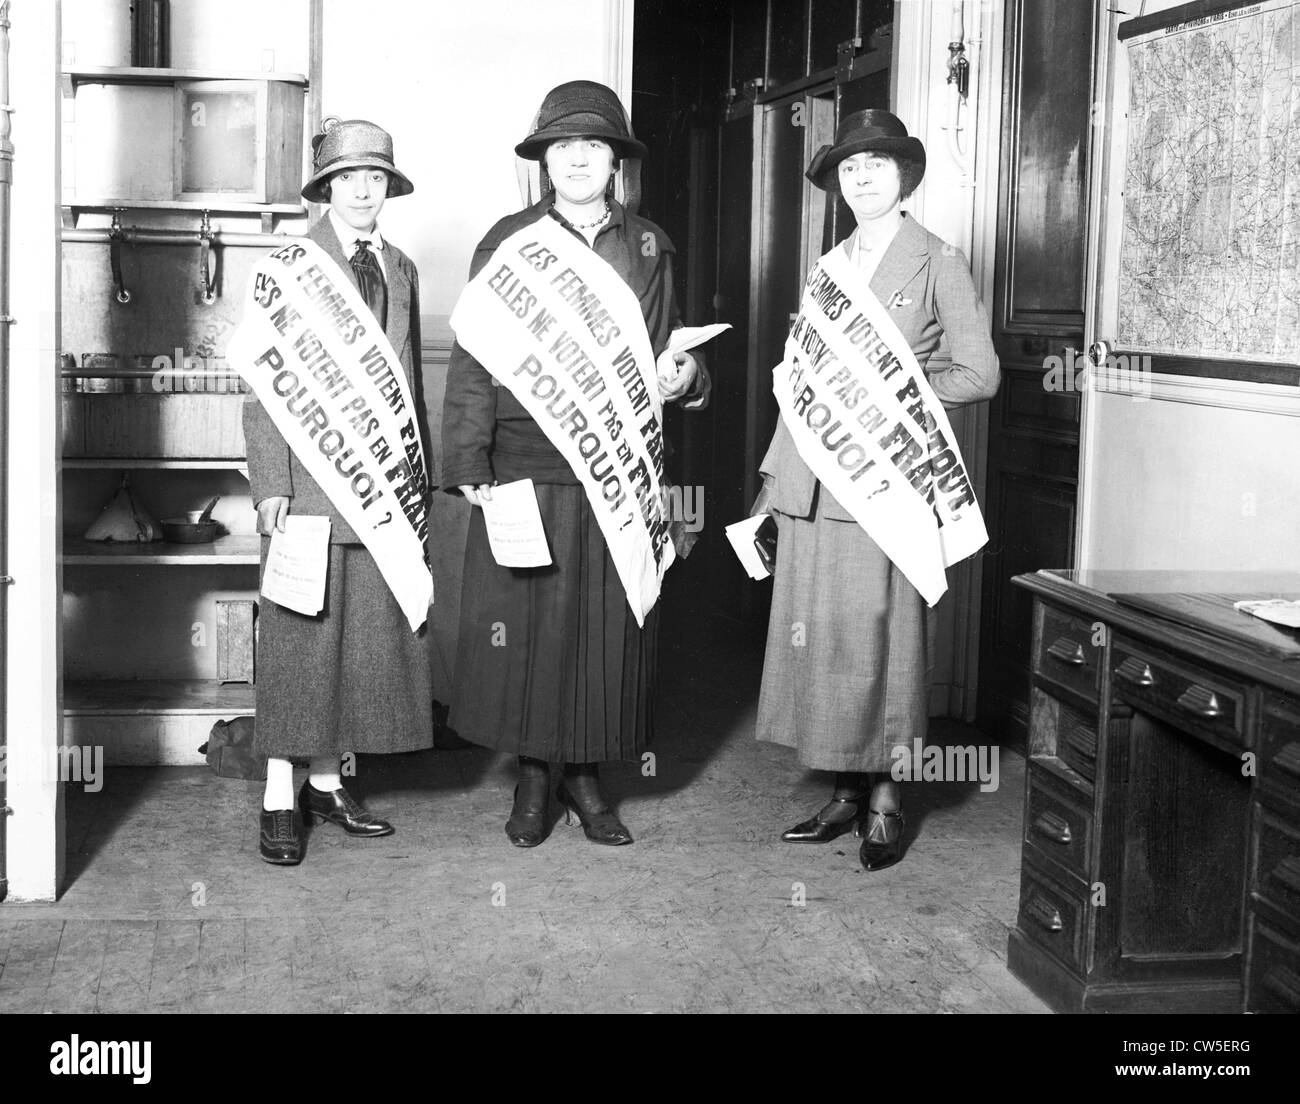 French league for women's right to vote. Suffragettes. Suffragettes. Stock Photo